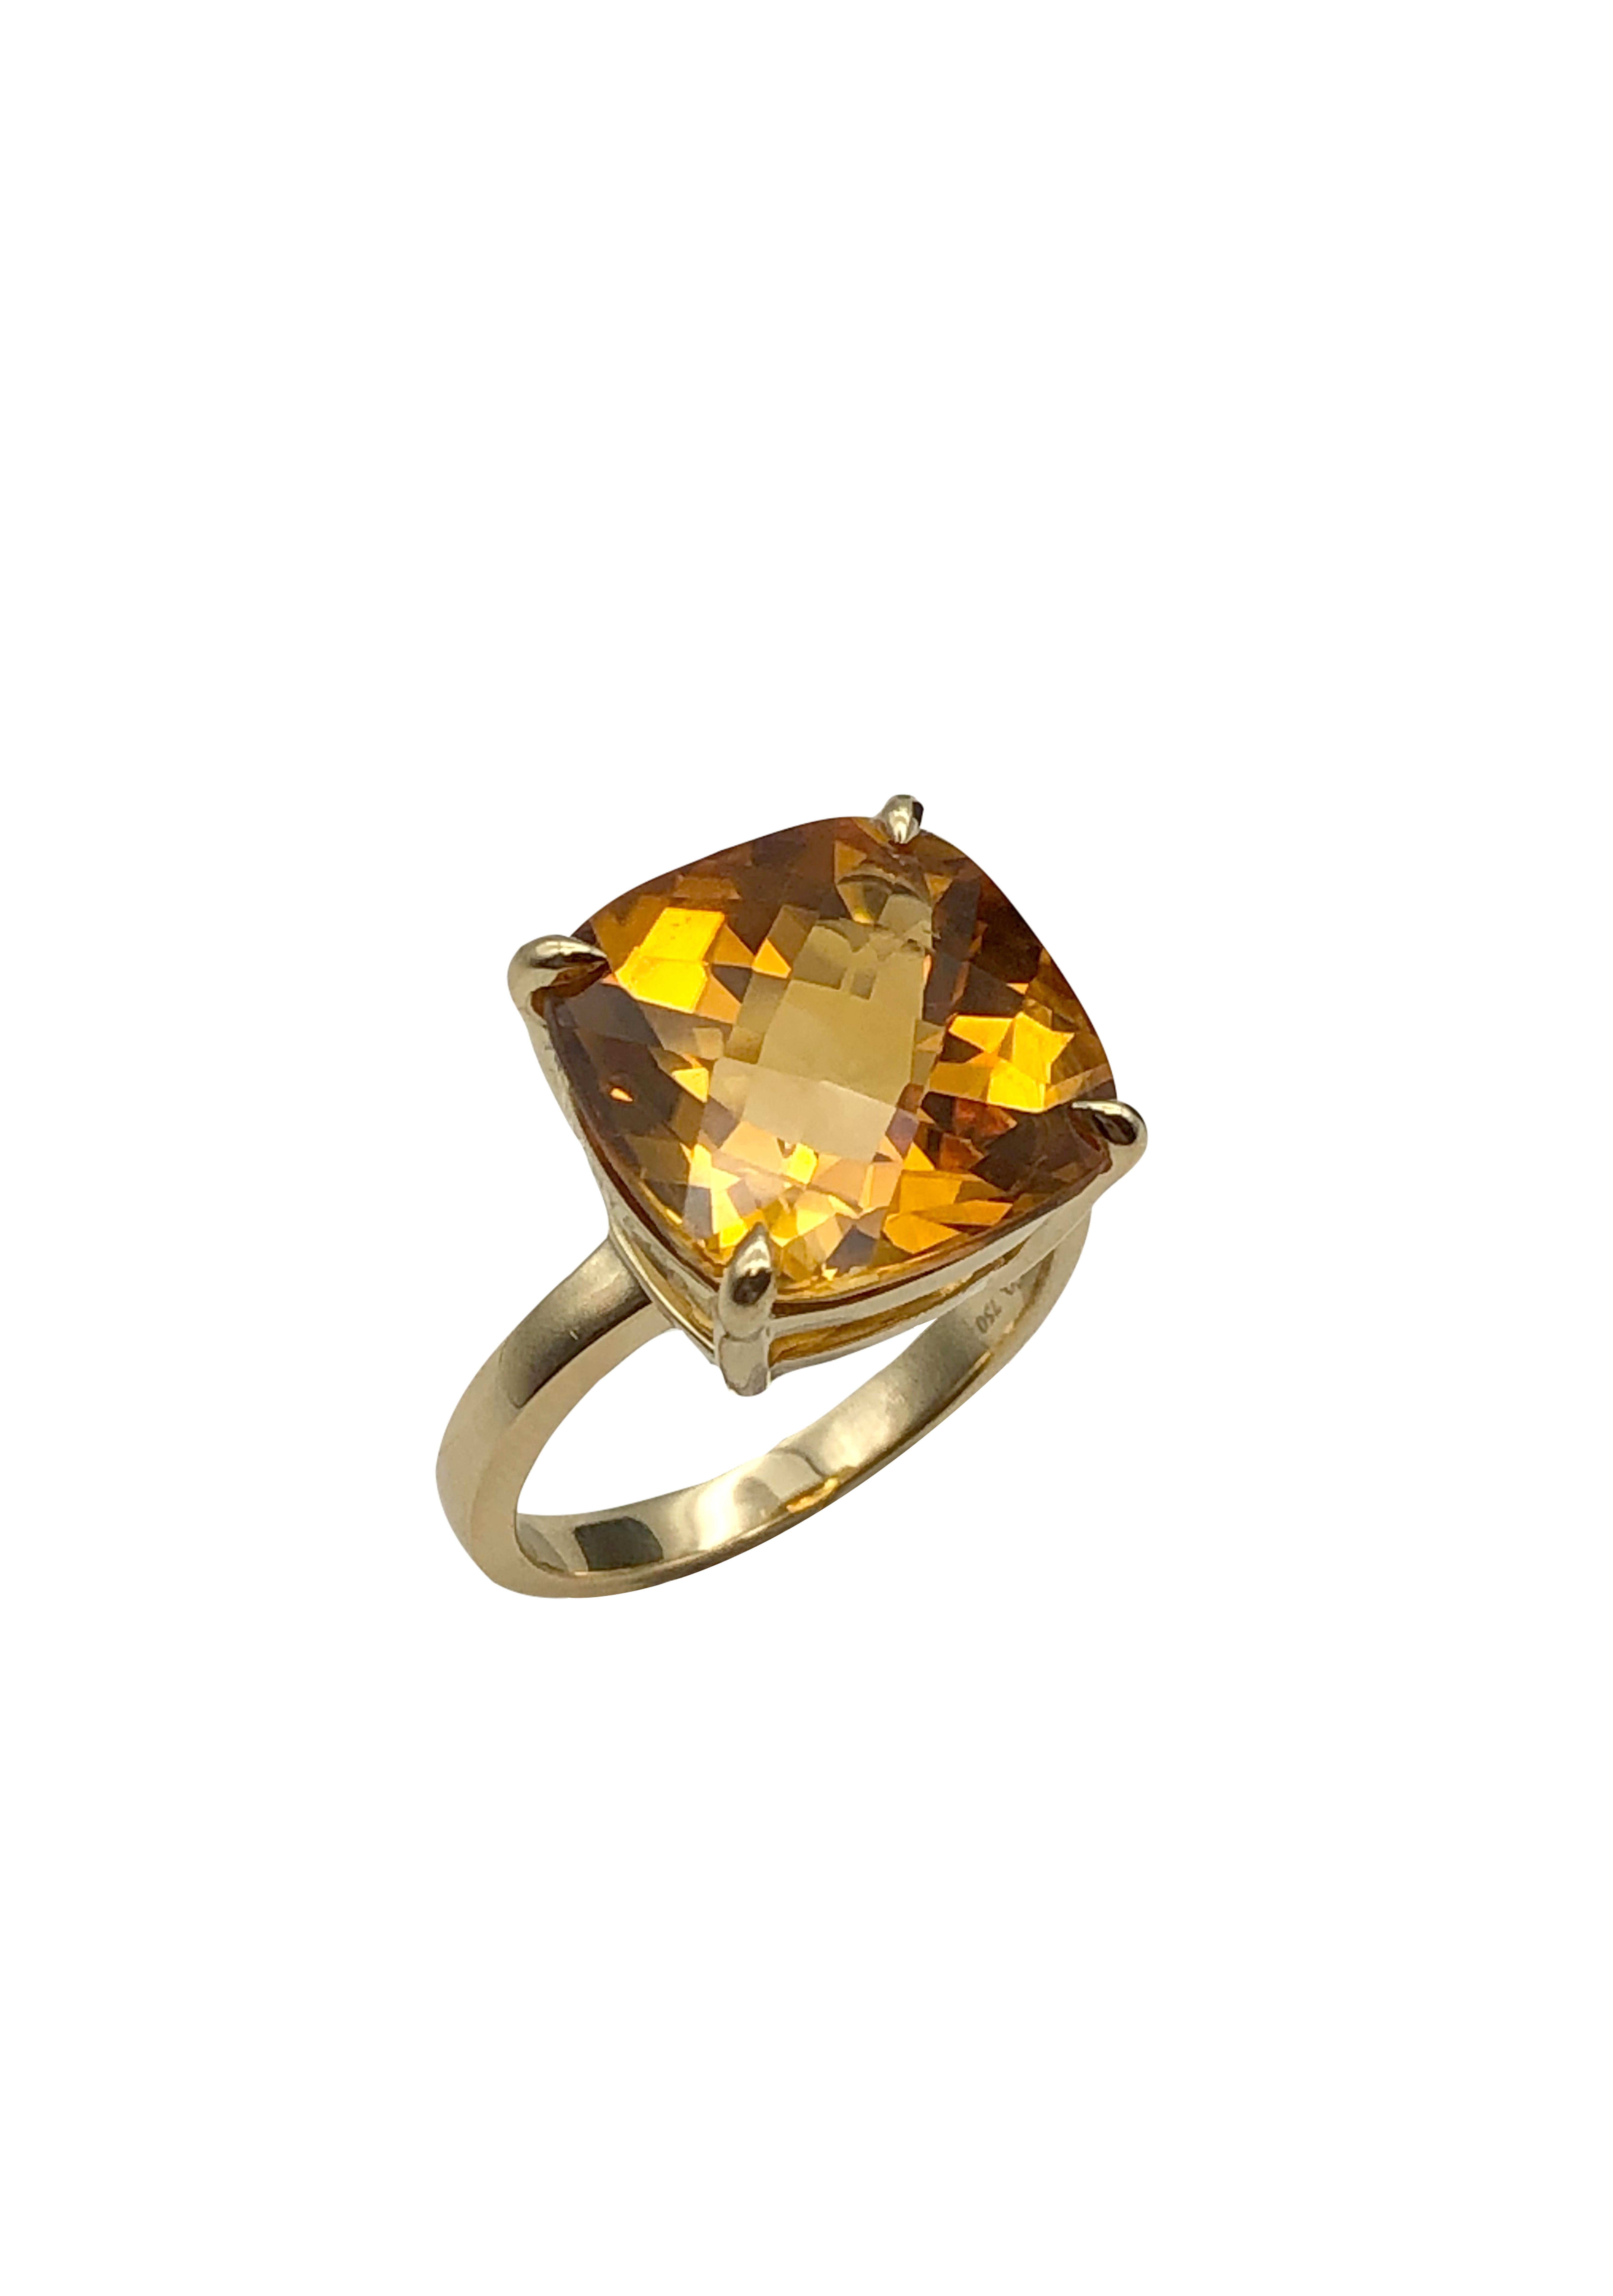 Circa 2018 Tiffany & Company Sugar Stacks collection 18k Yellow Gold Ring, centrally set with a very fine intense color Cross cut Cushion shape Citrine measuring 14 X 14 M.M. approximately 8 Carats. Finger size 8. Comes in Original Tiffany